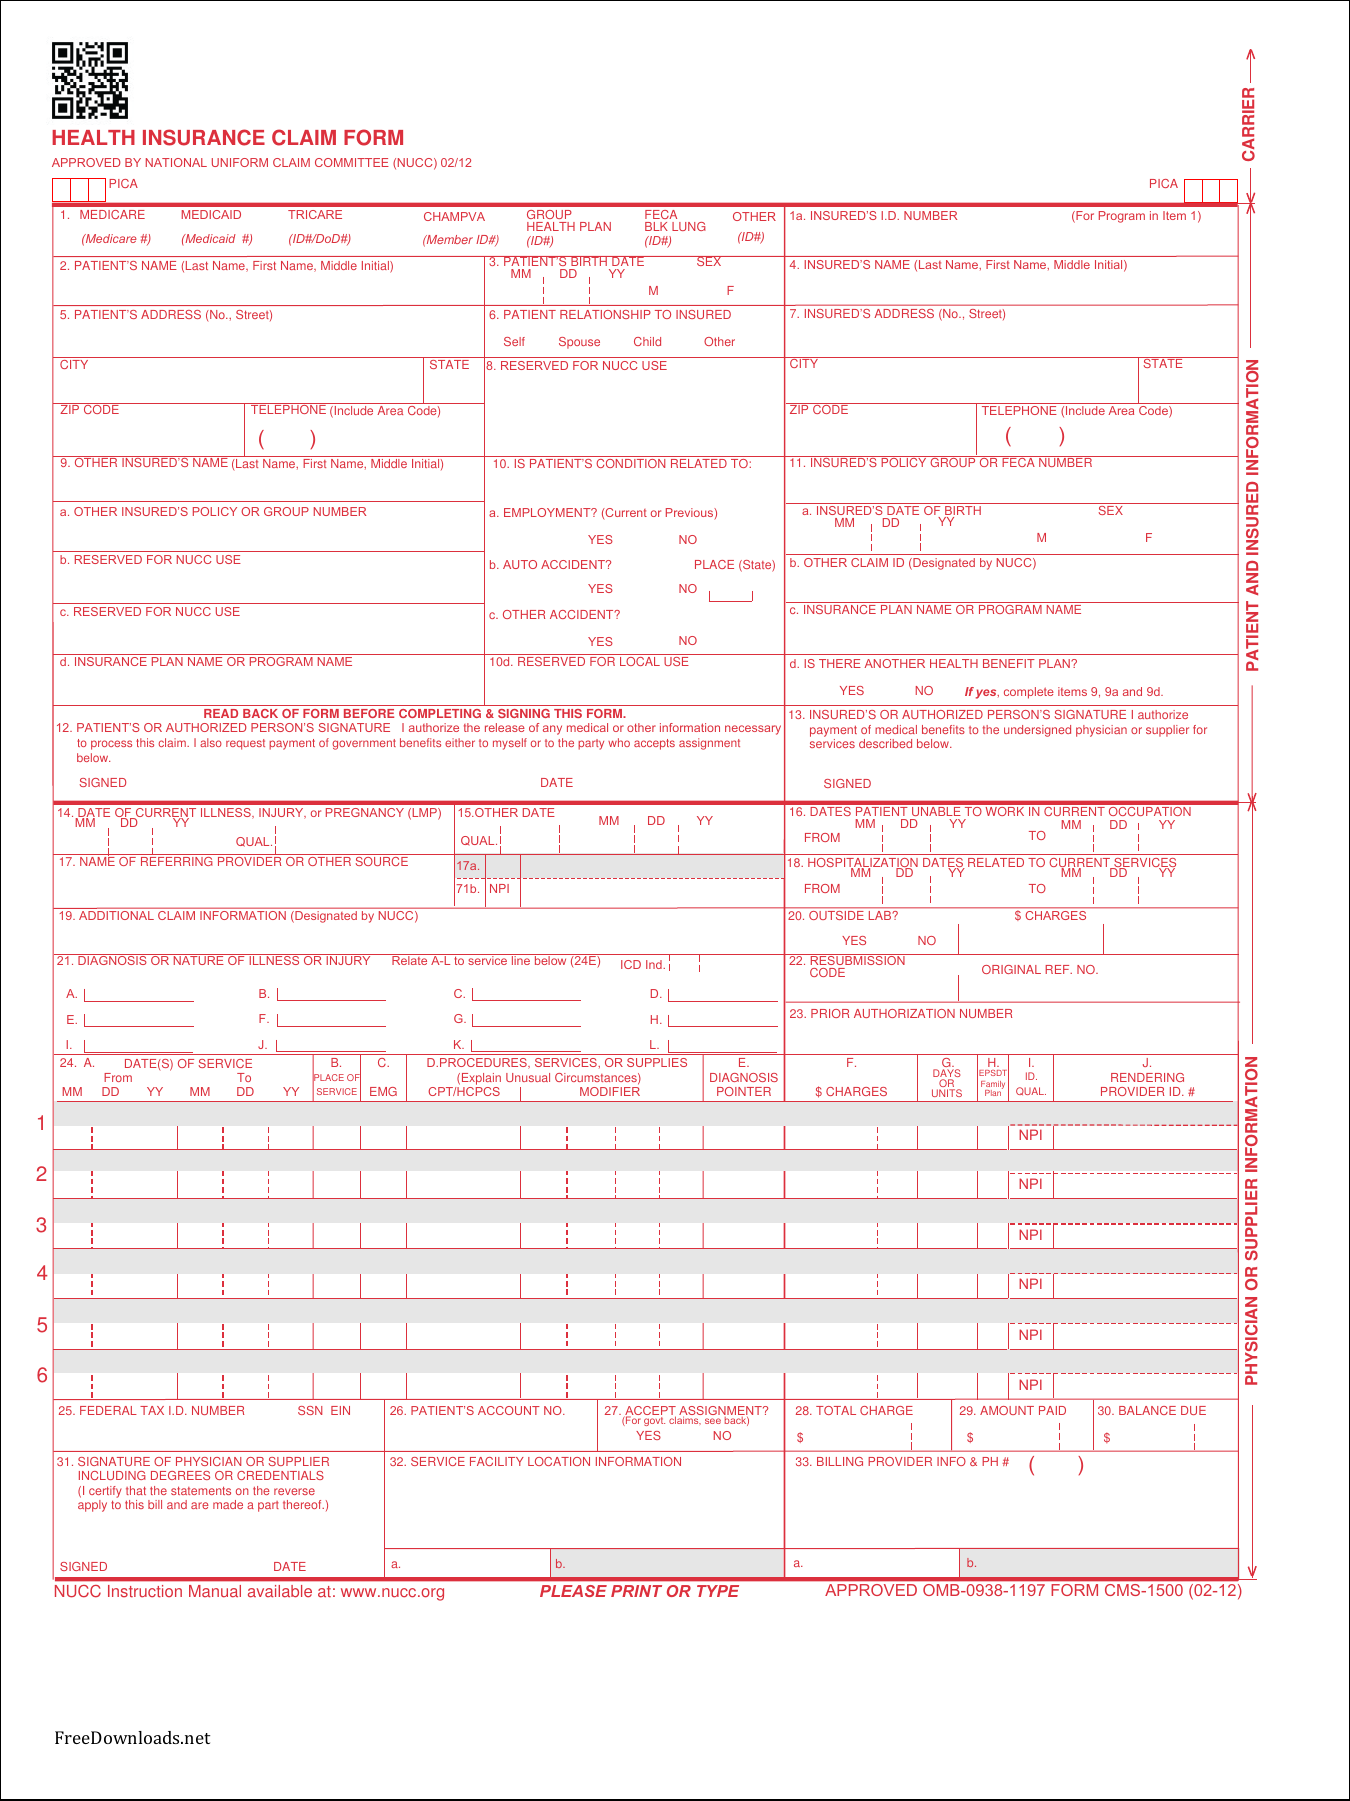 cms-1500-form-fillable-template-no-background-printable-forms-free-online